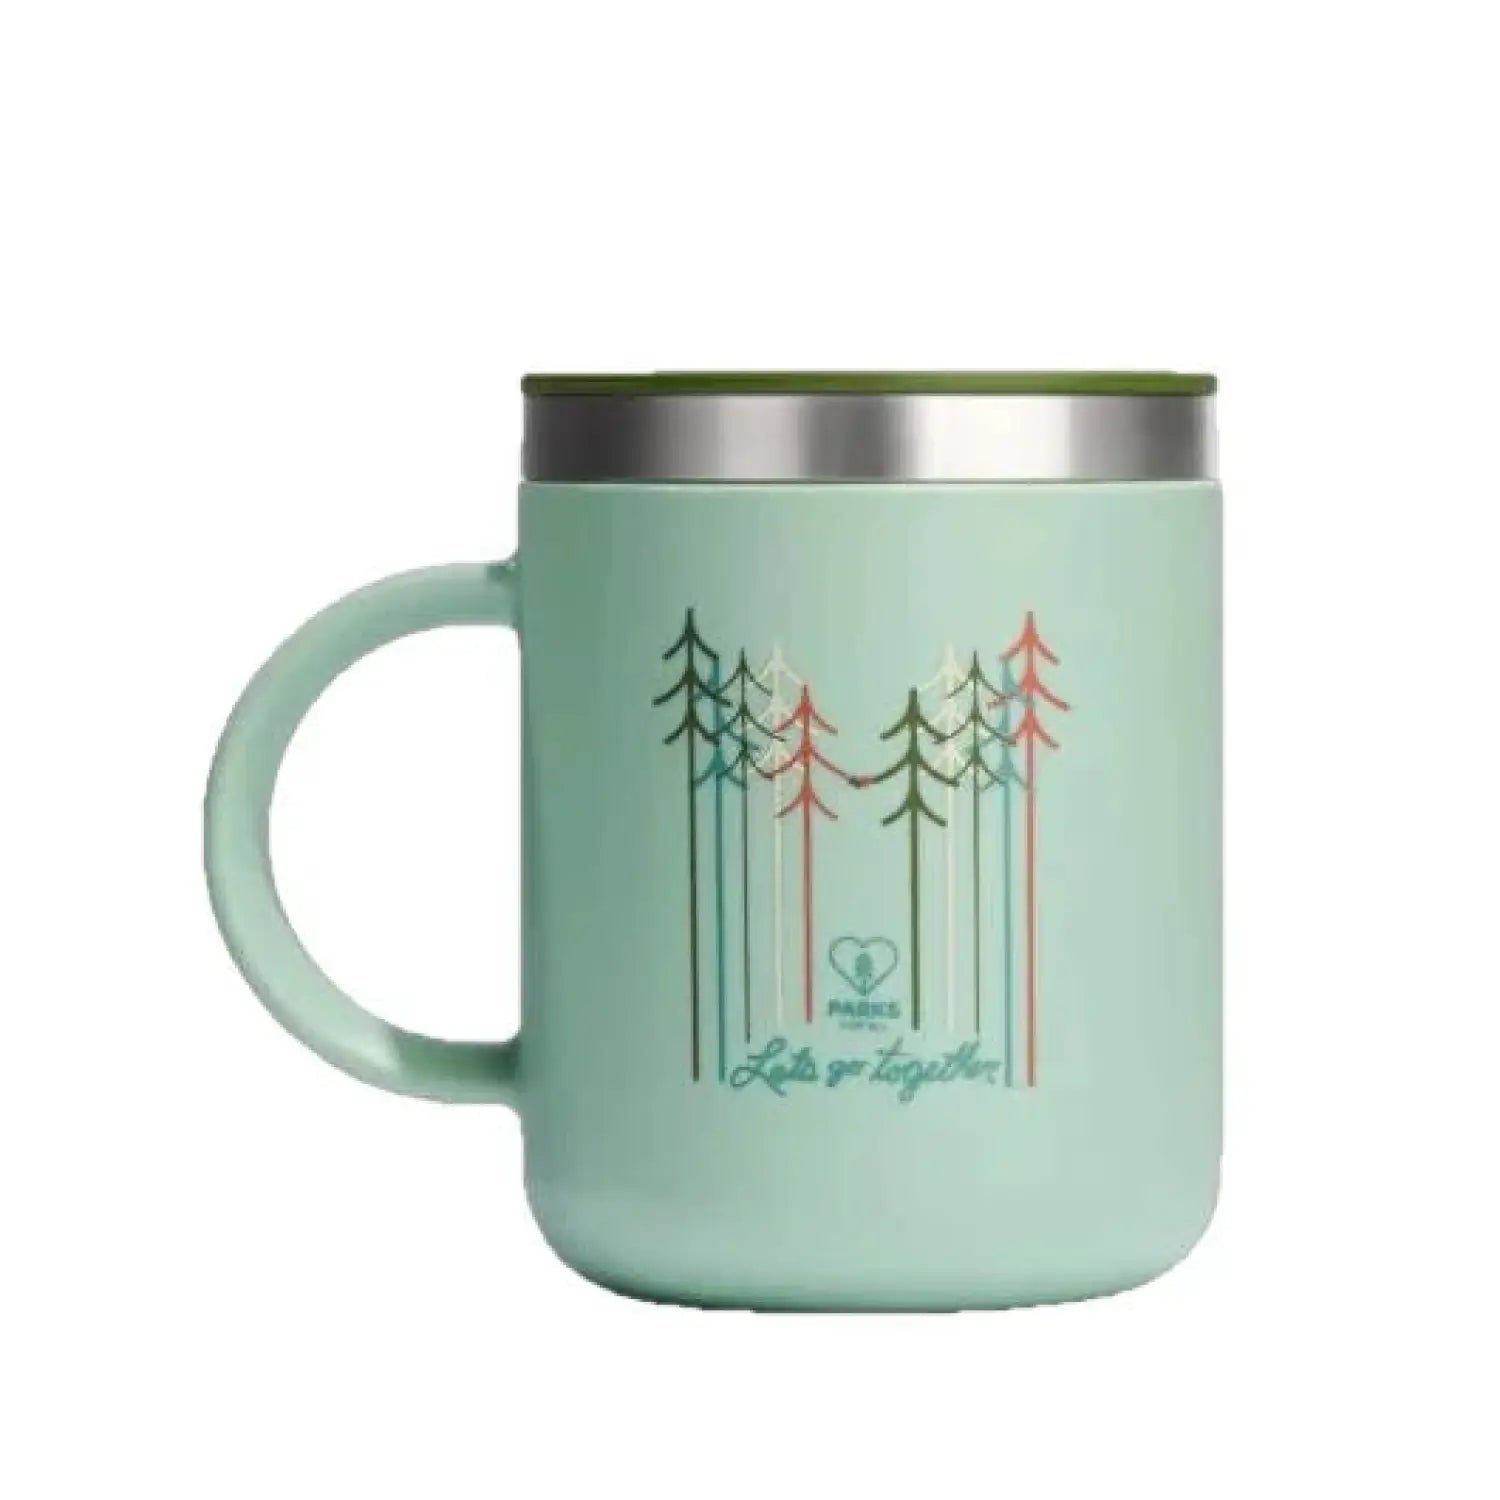 Hydro Flask Let's Go Together 12 oz Mug. Aqua colored mug with tree design in green, blue, white, and red colors. 